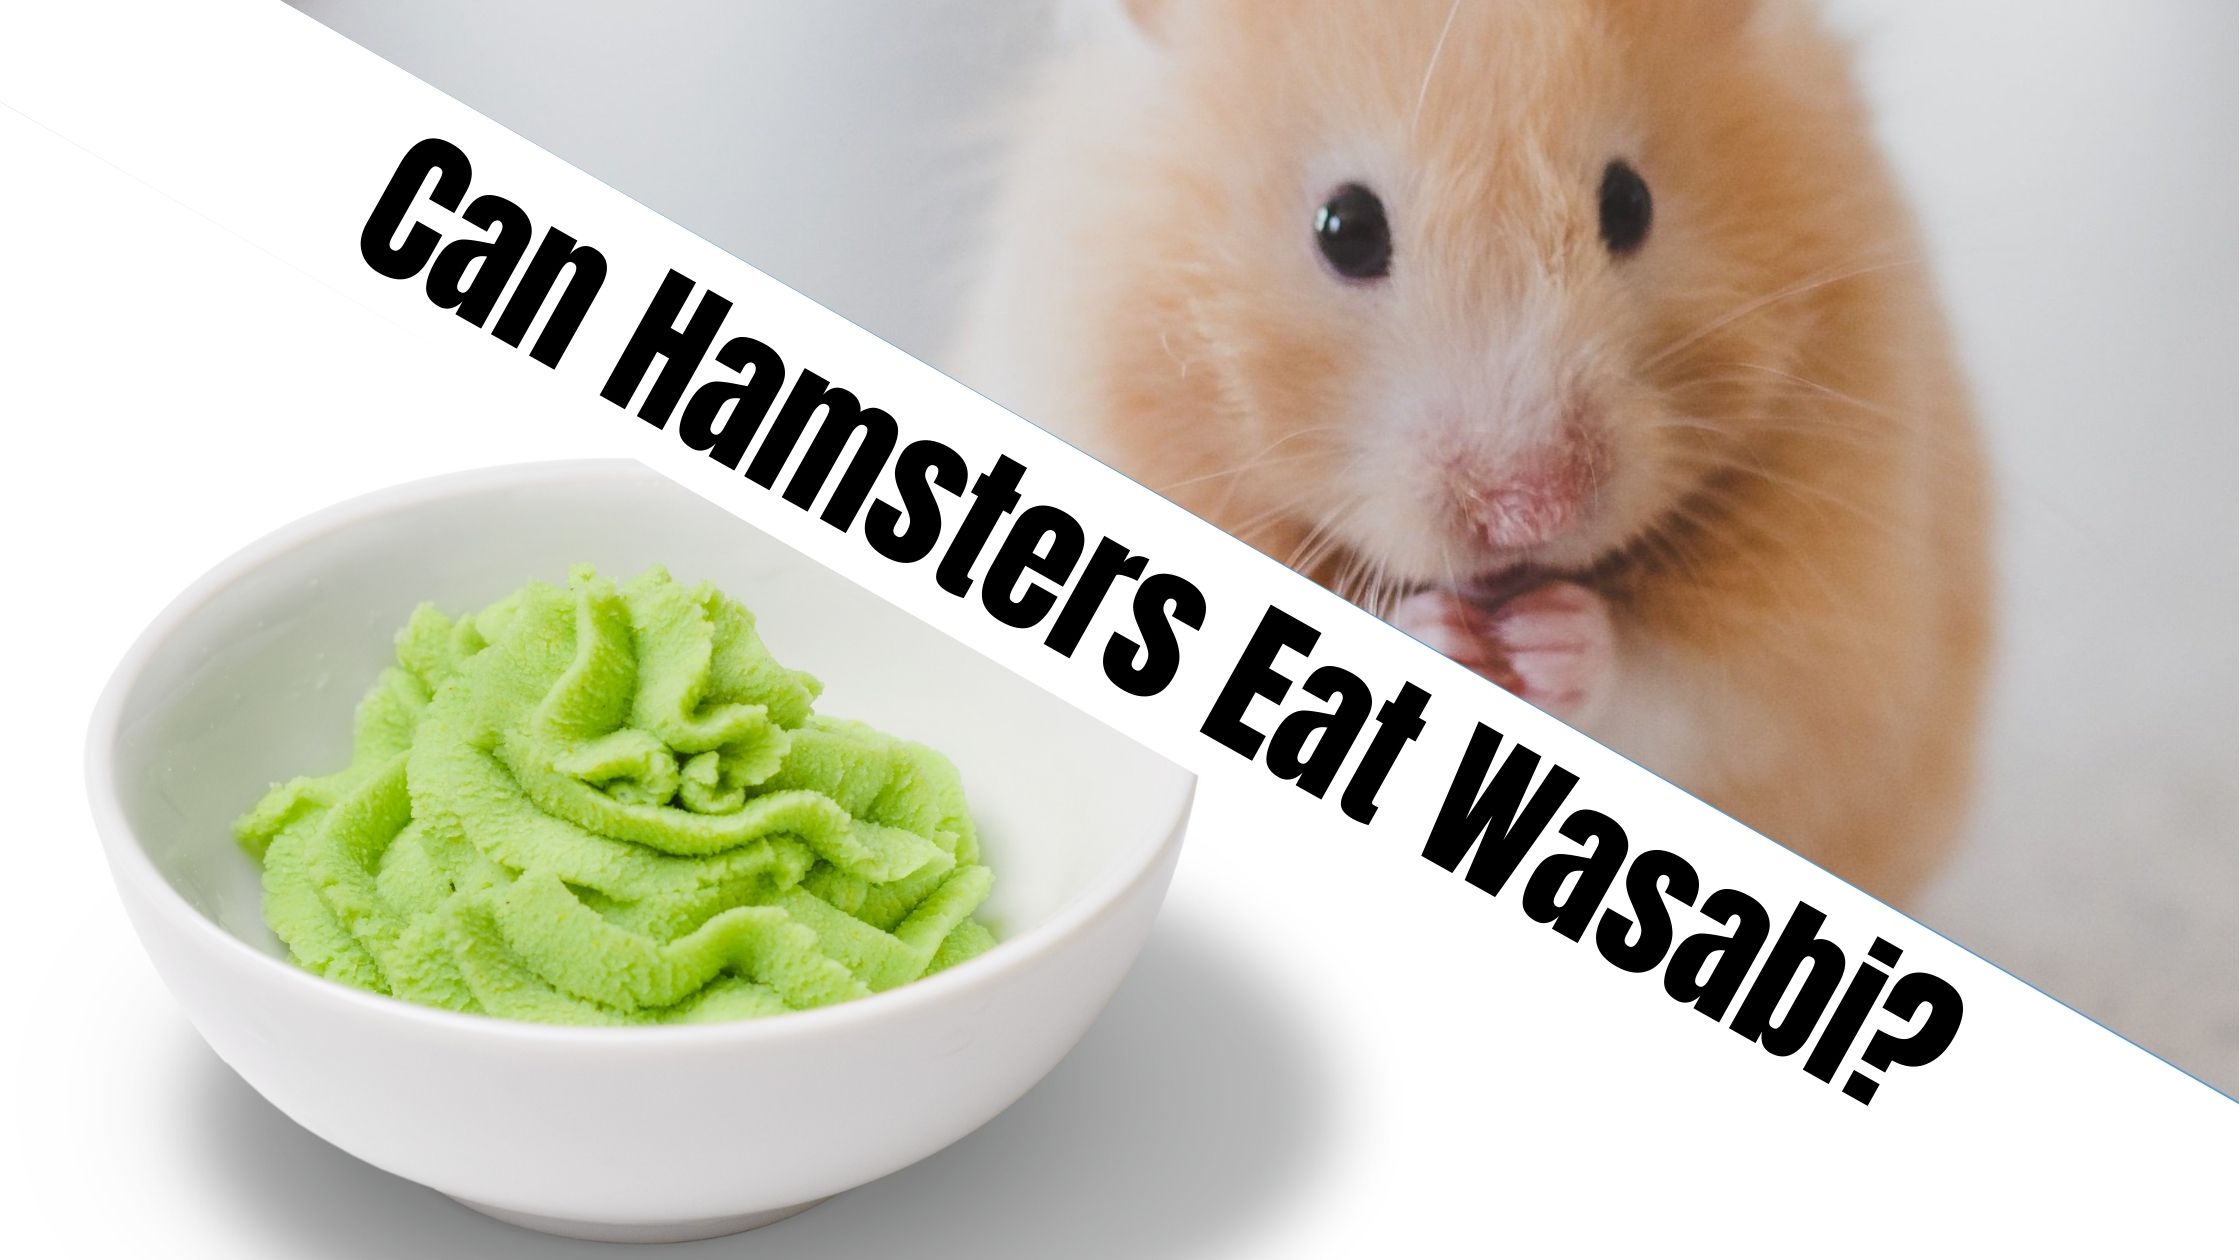 Can Hamsters Eat Wasabi?